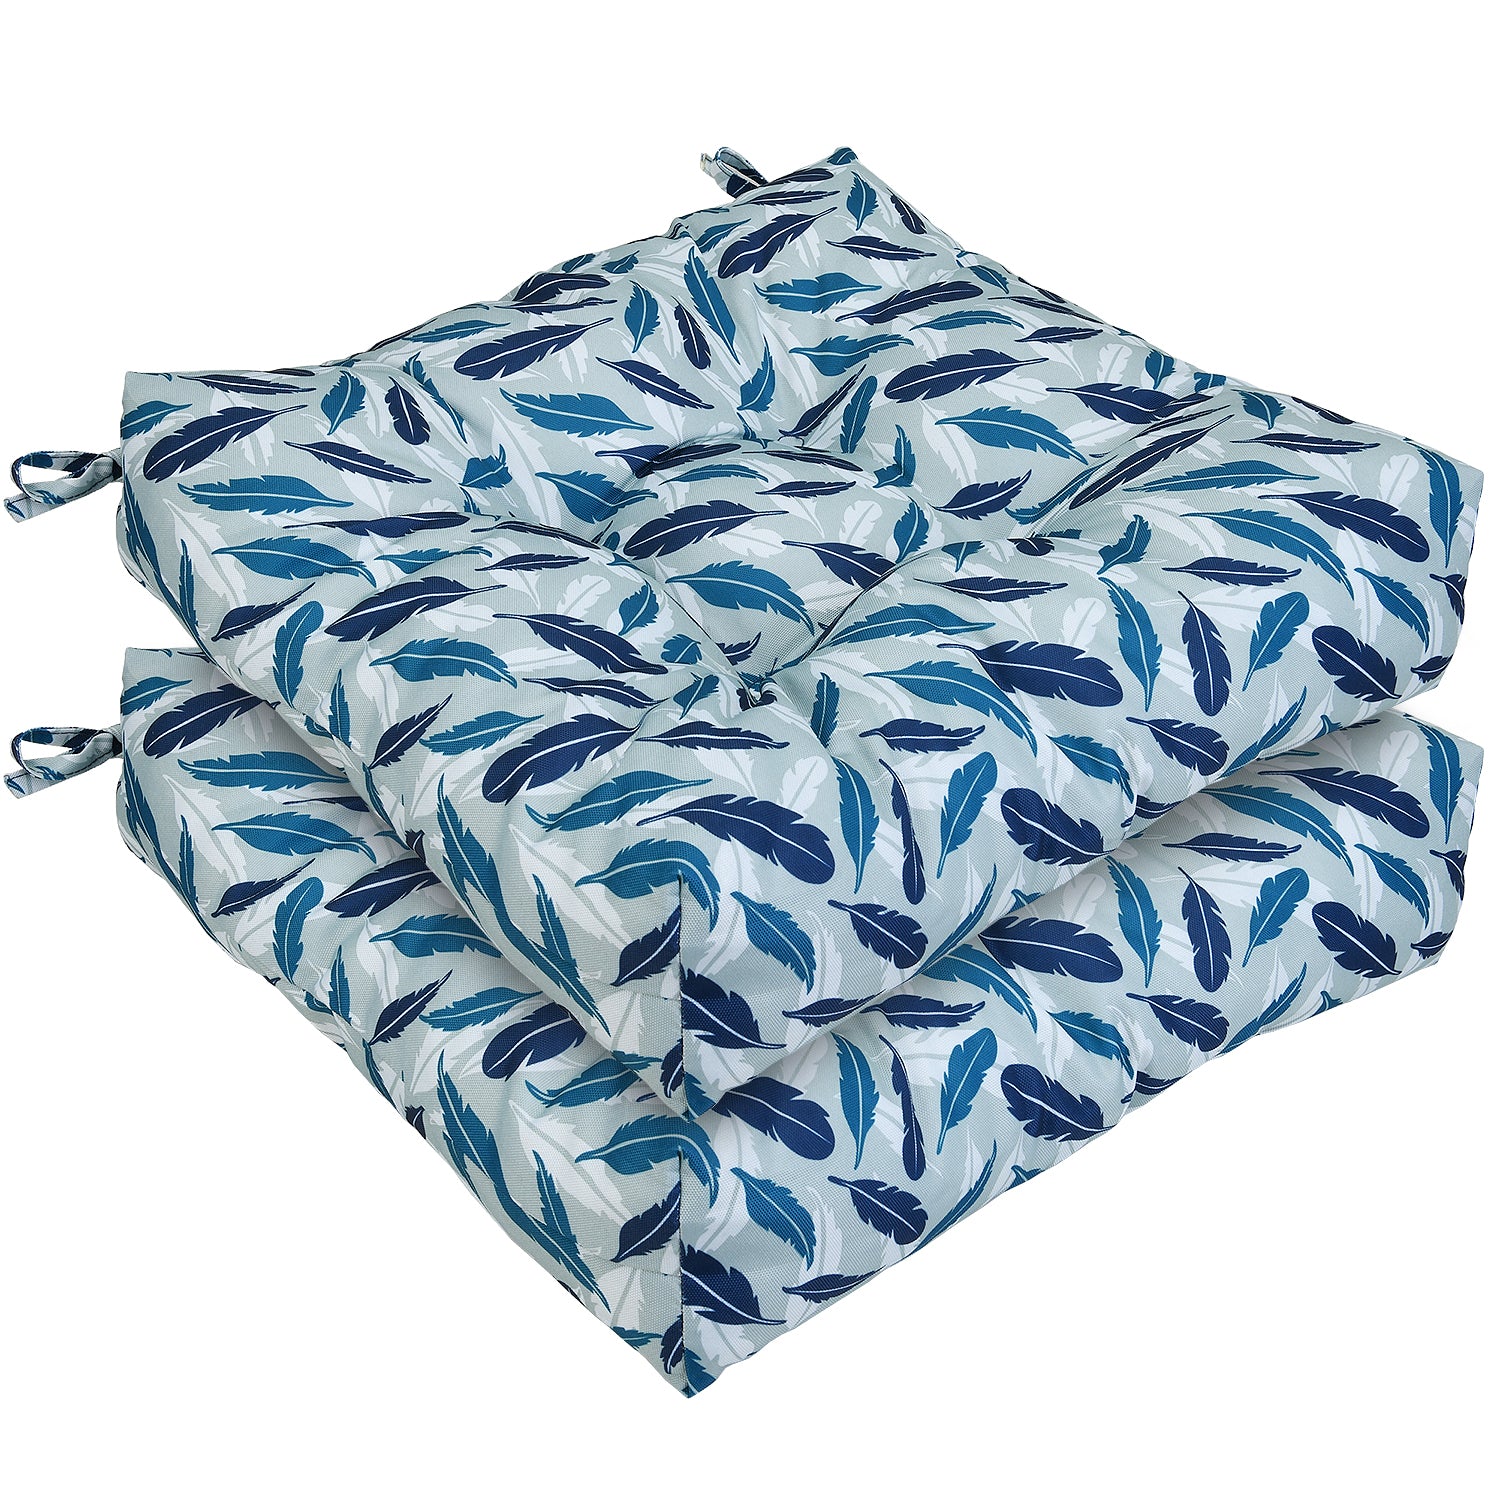 Boutique Floral Indoor/Outdoor Chair Pad, Blue, Chair Pad